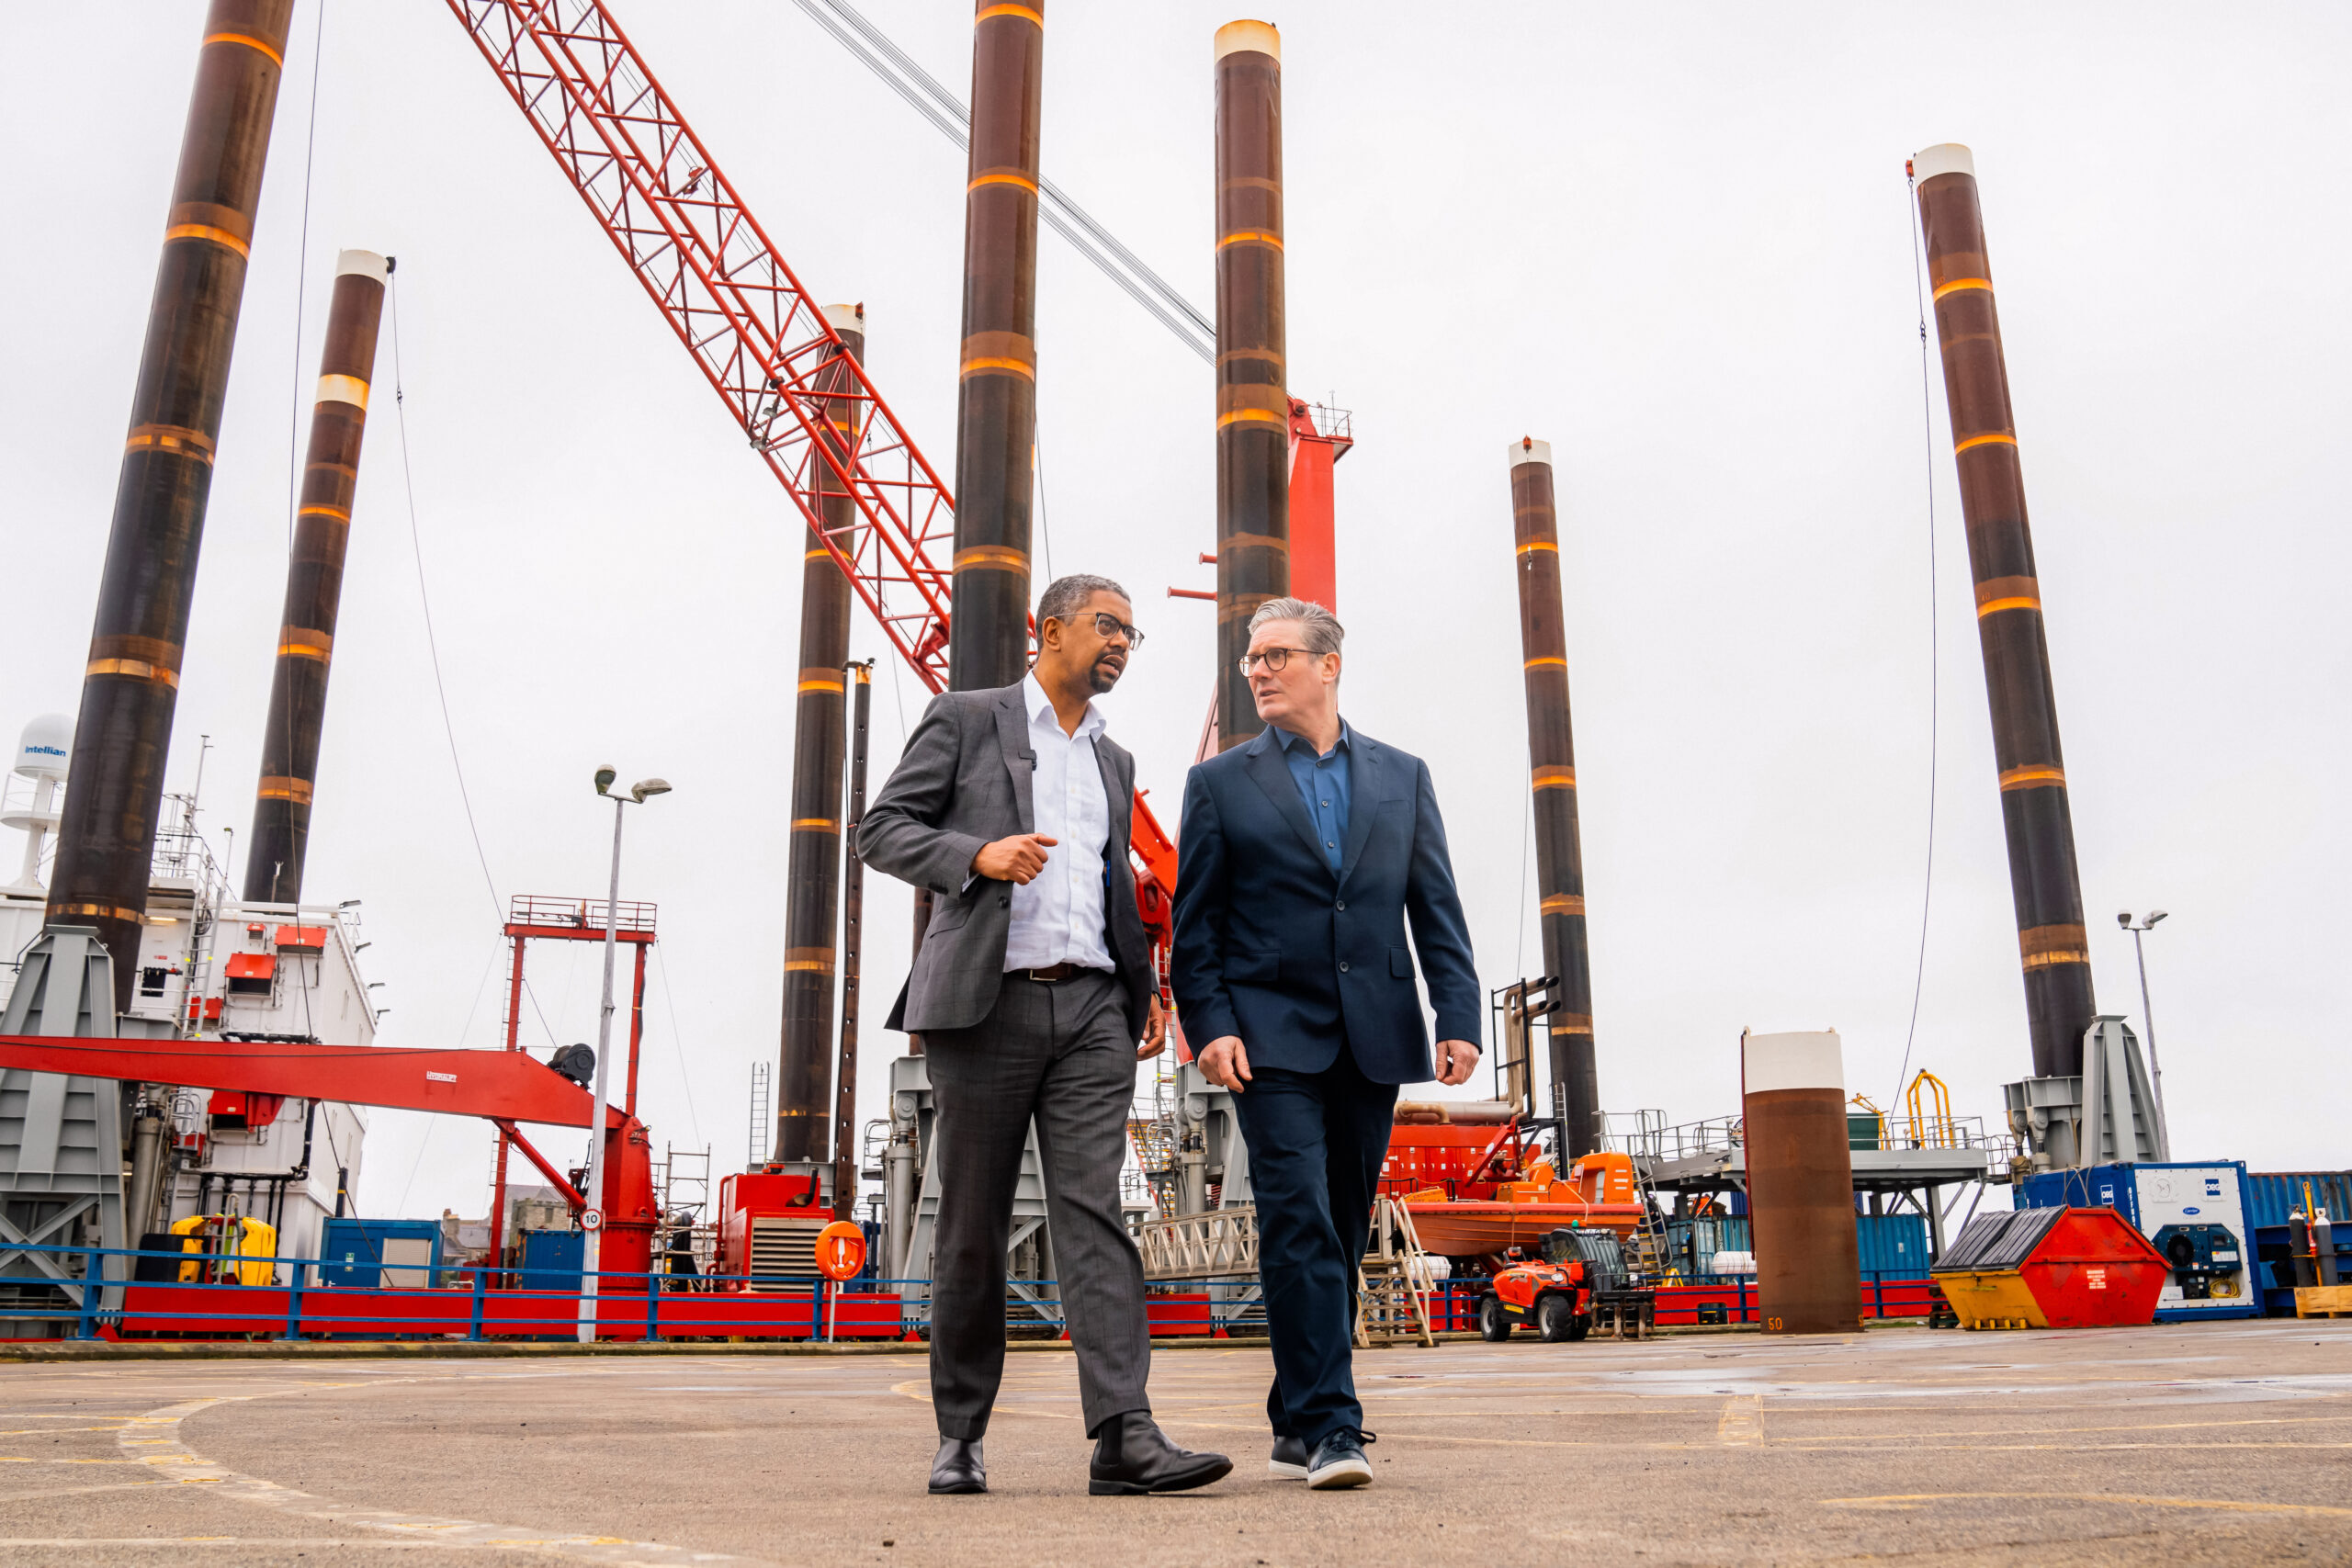 Vaughan Gething and Keir Starmer on a visit to the Port of Holyhead